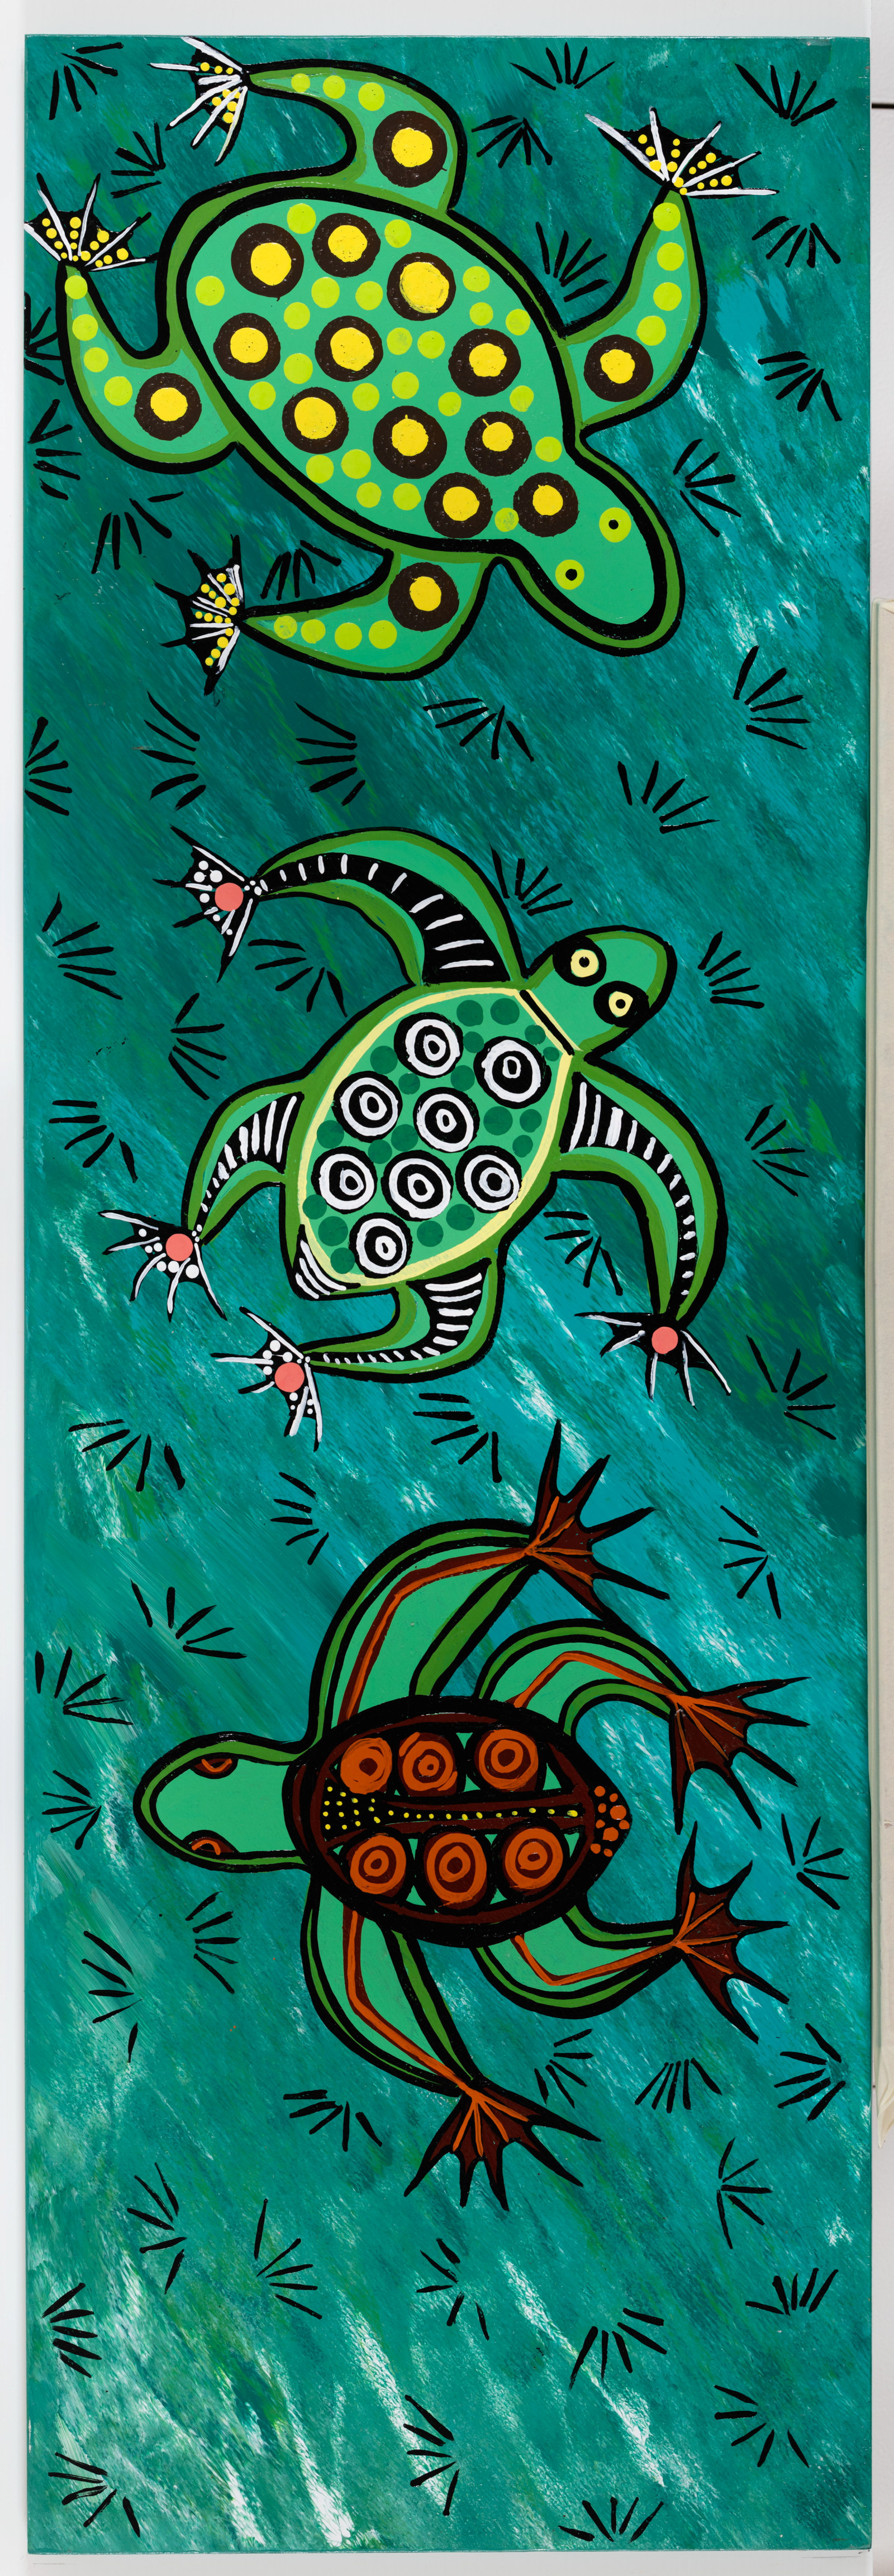 Swampies, Jessica Mook-Brown, 2022, acrylic on plywood board, 122.5cm x 41cm
Swamp Turtles of the lagoon.